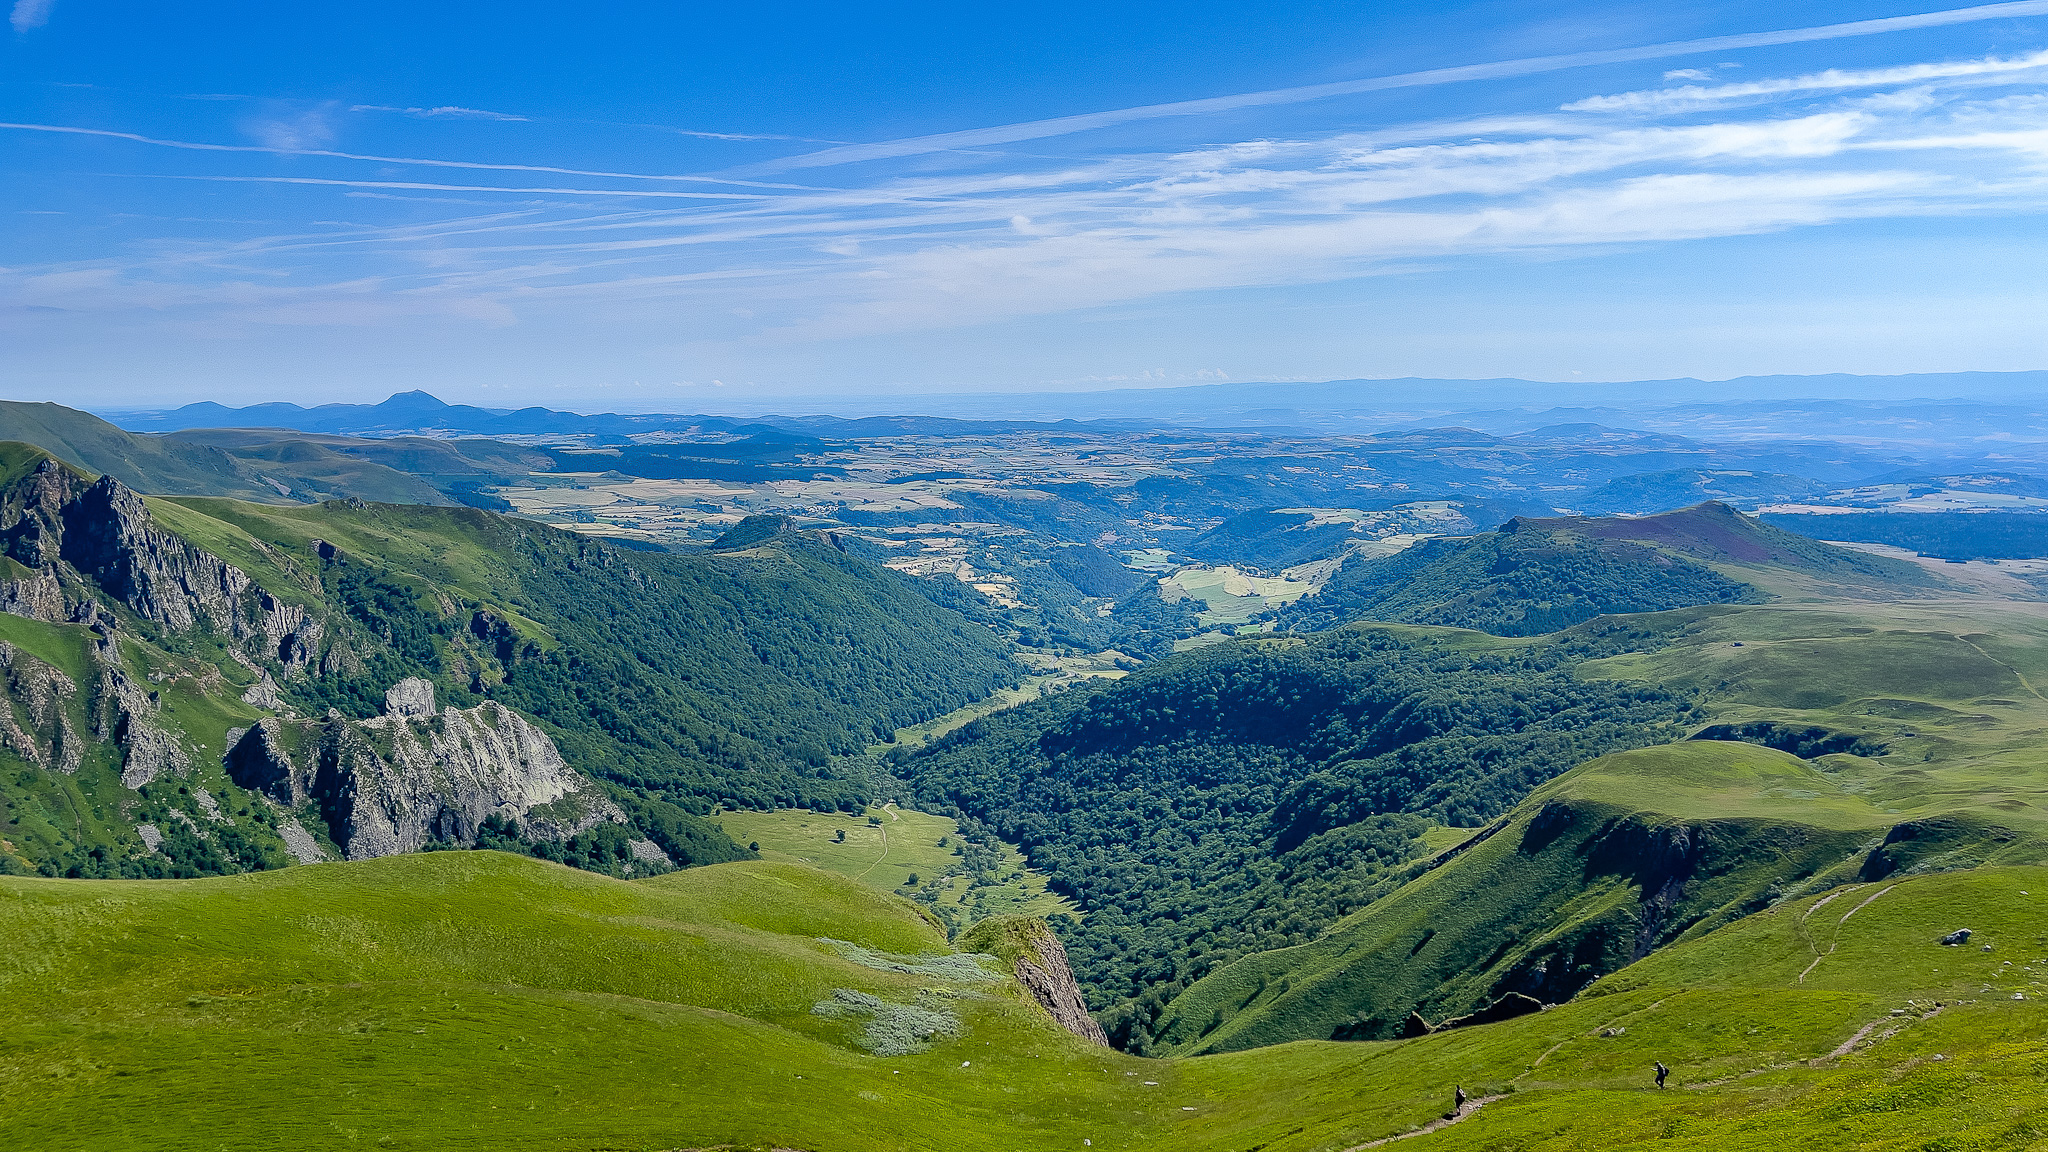 The Chaudefour Valley from the summit of Puy de la Perdrix